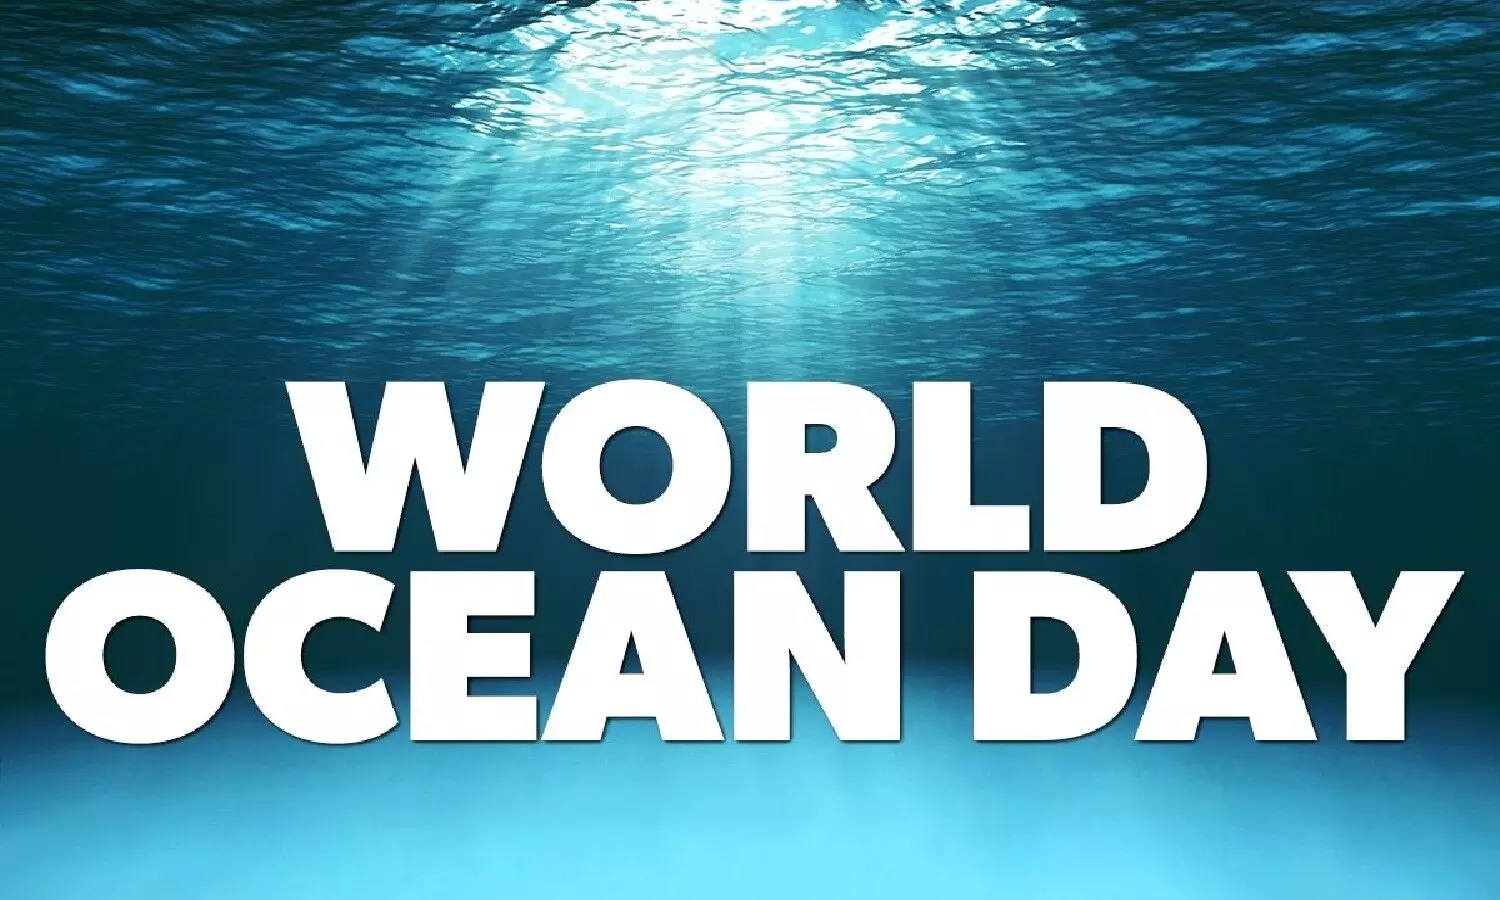 World Ocean Day is celebrated on 8 June. We will tell you about some such facts related to oceans.